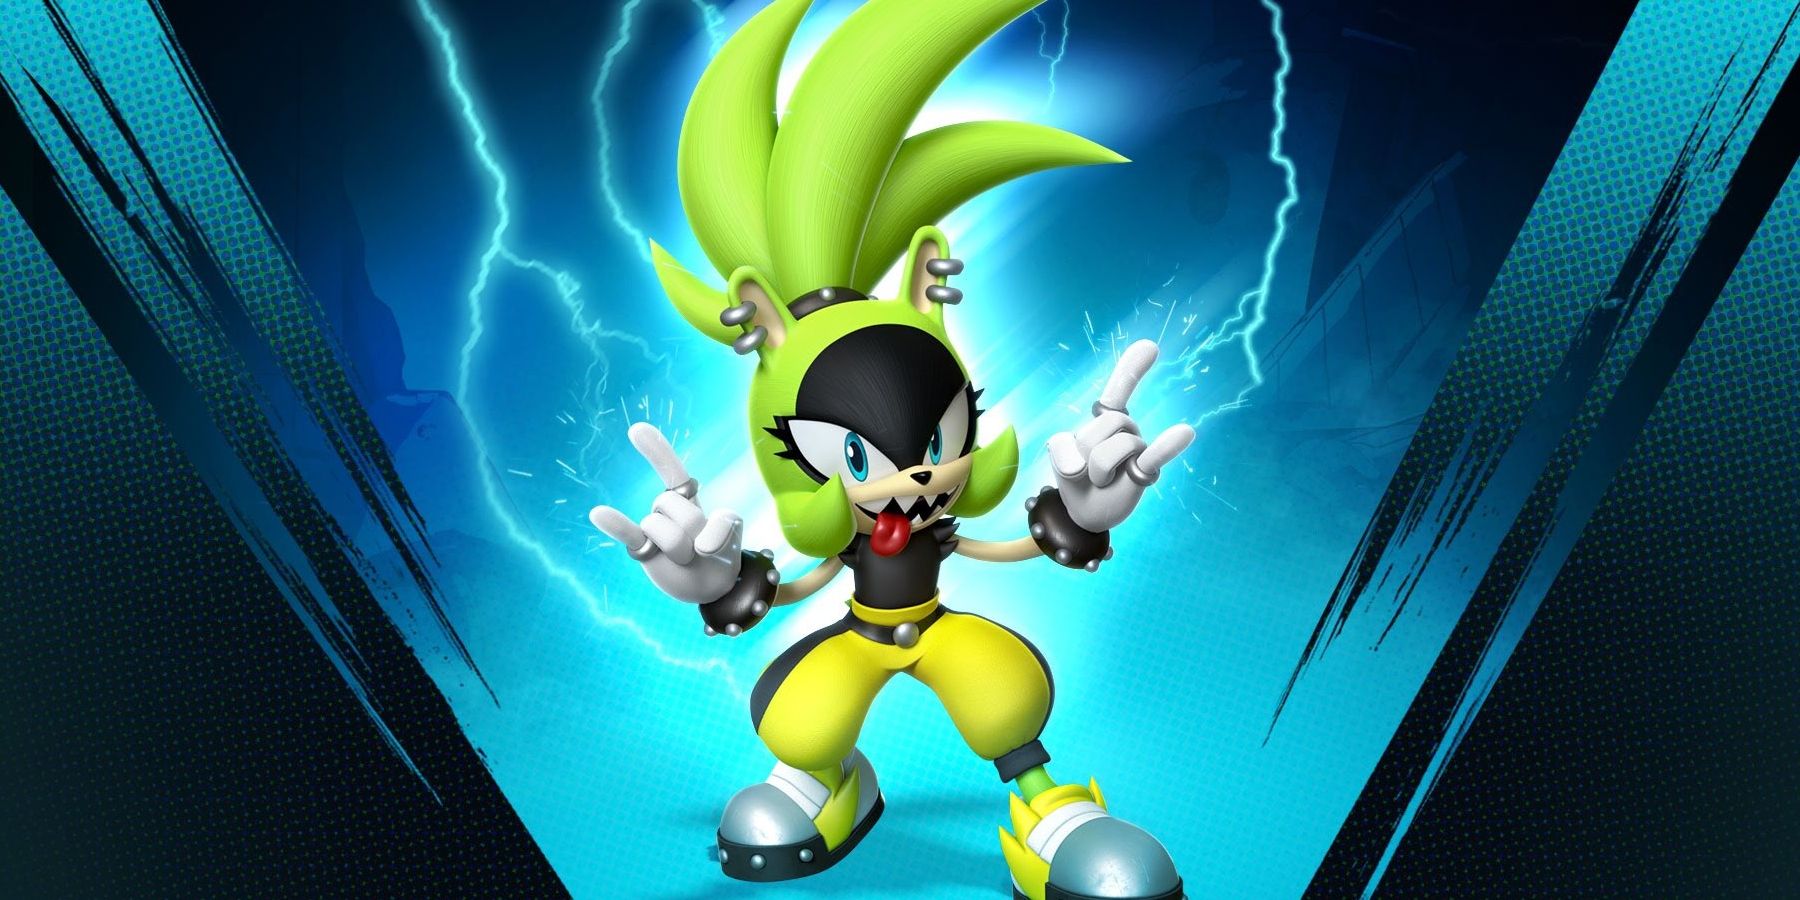 Surge the Tenrec from Sonic the Hedgehog as video game character